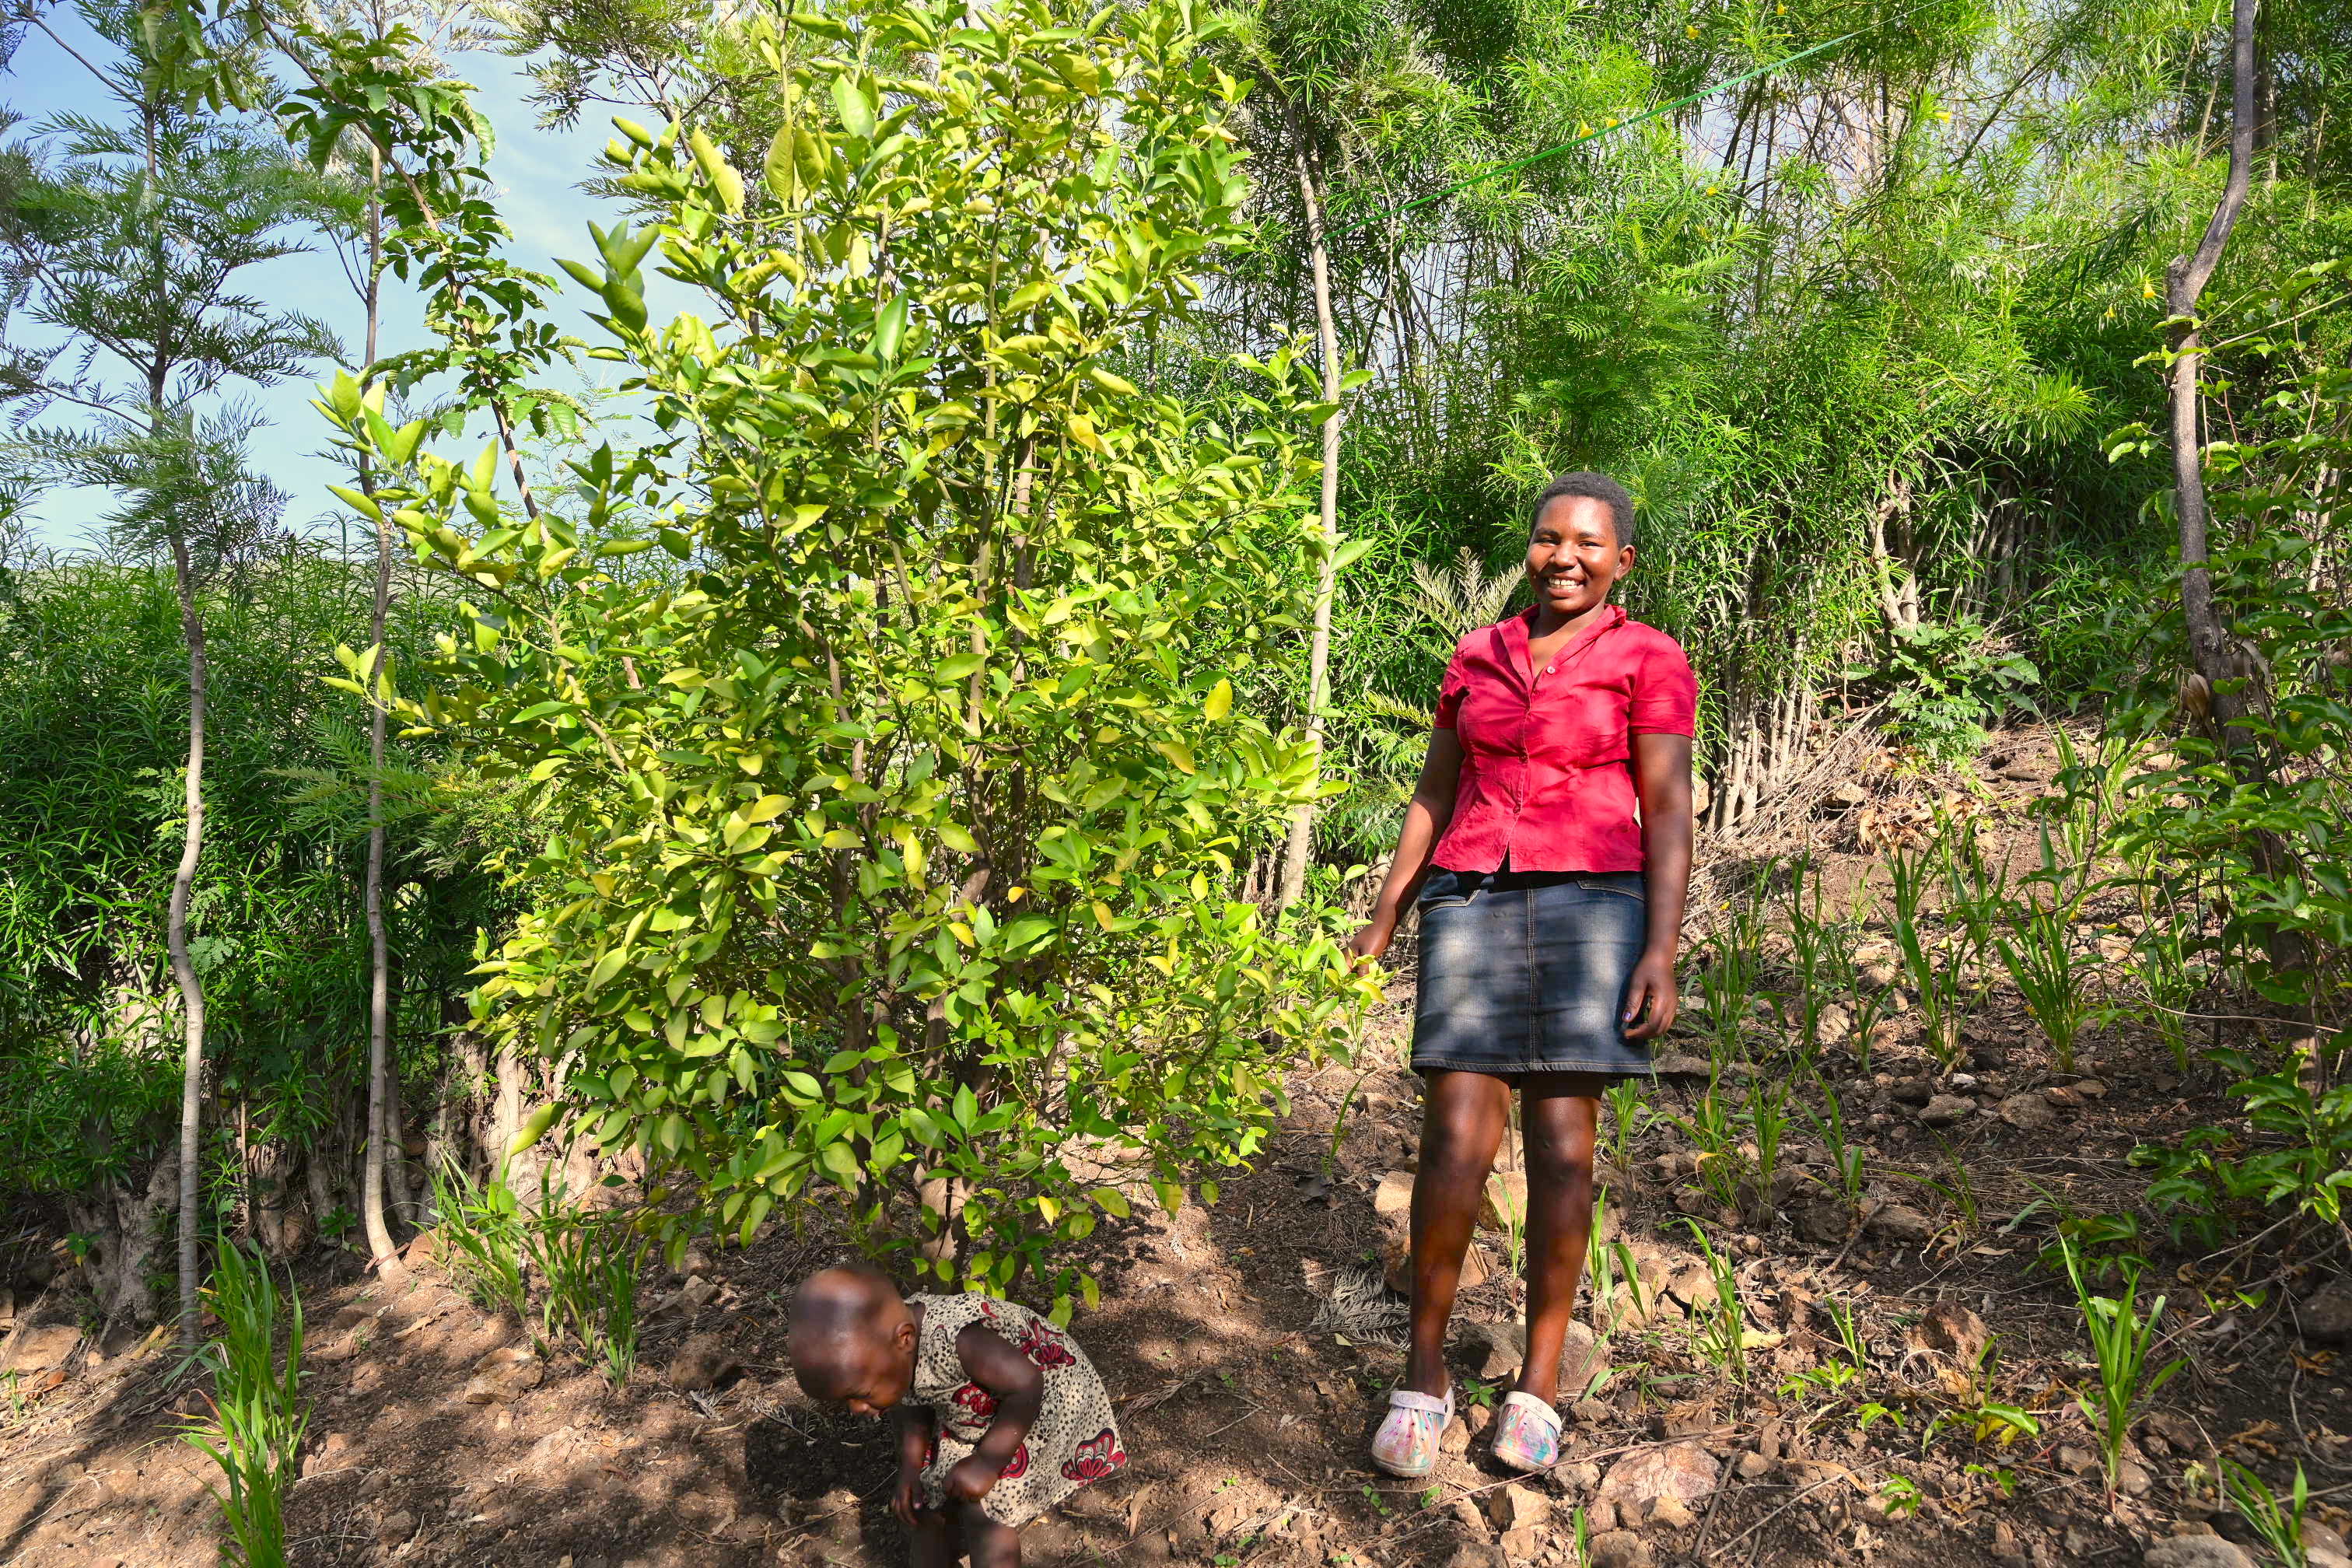 The lemon trees in Salome's farm have provided the family with a fruit that has immense health benefits and also enjoys a high market demand.